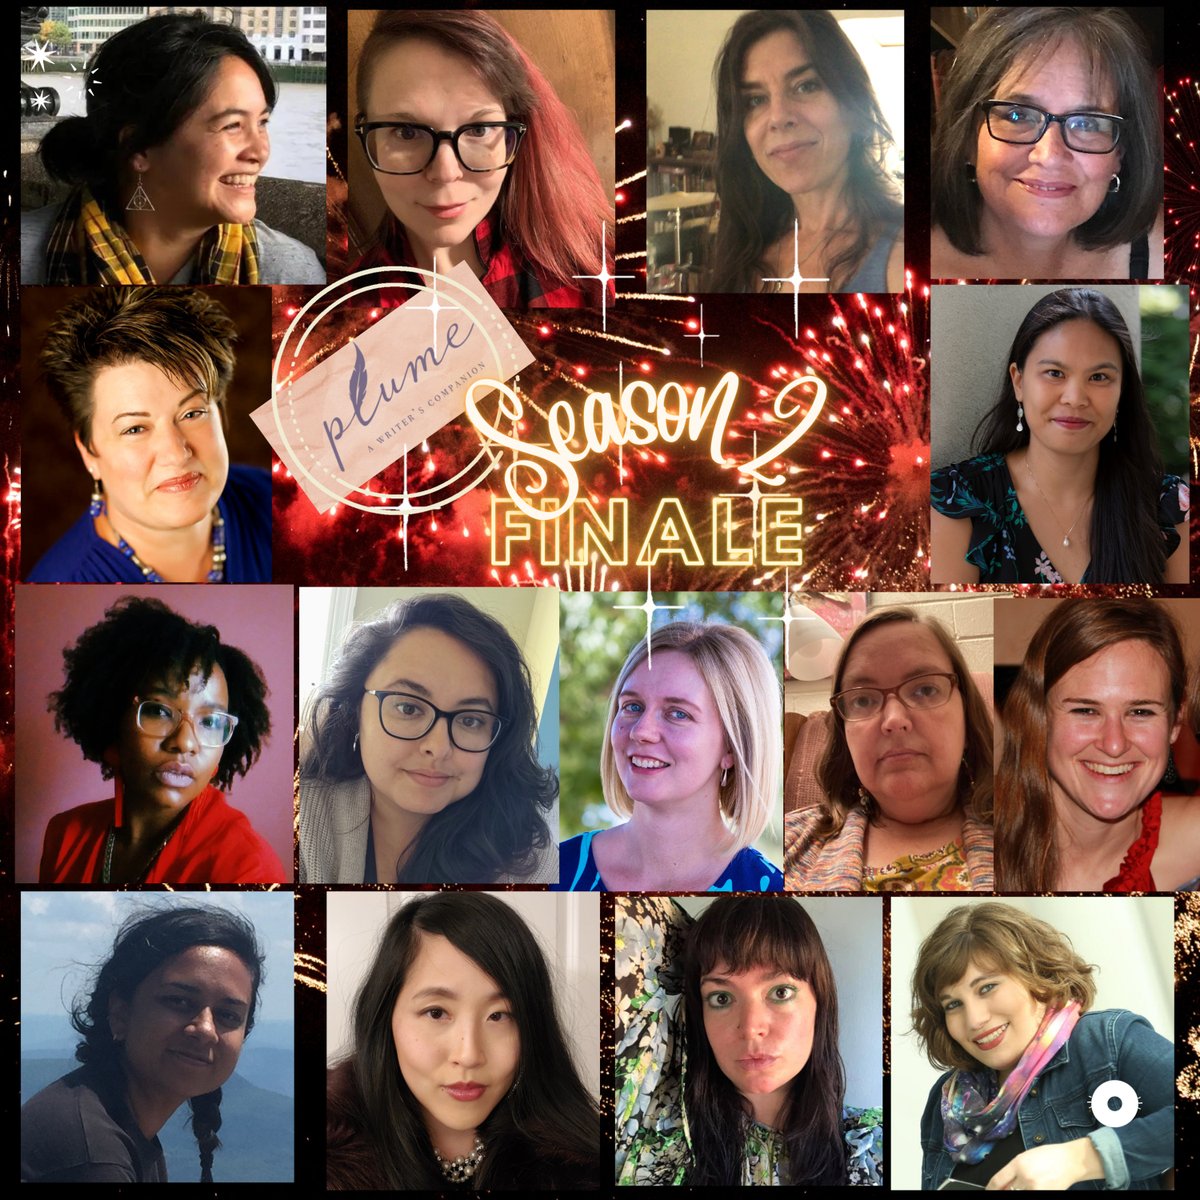 Our season 2 finale episode is out now! We invited featured writers, rountable panelists, & Plume community members to read their work, & the results are ✨ magical.✨  Find us on your favorite podcast app under Plume: A Writer's Podcast.💜  #WritingCommunity #WriterPodcast